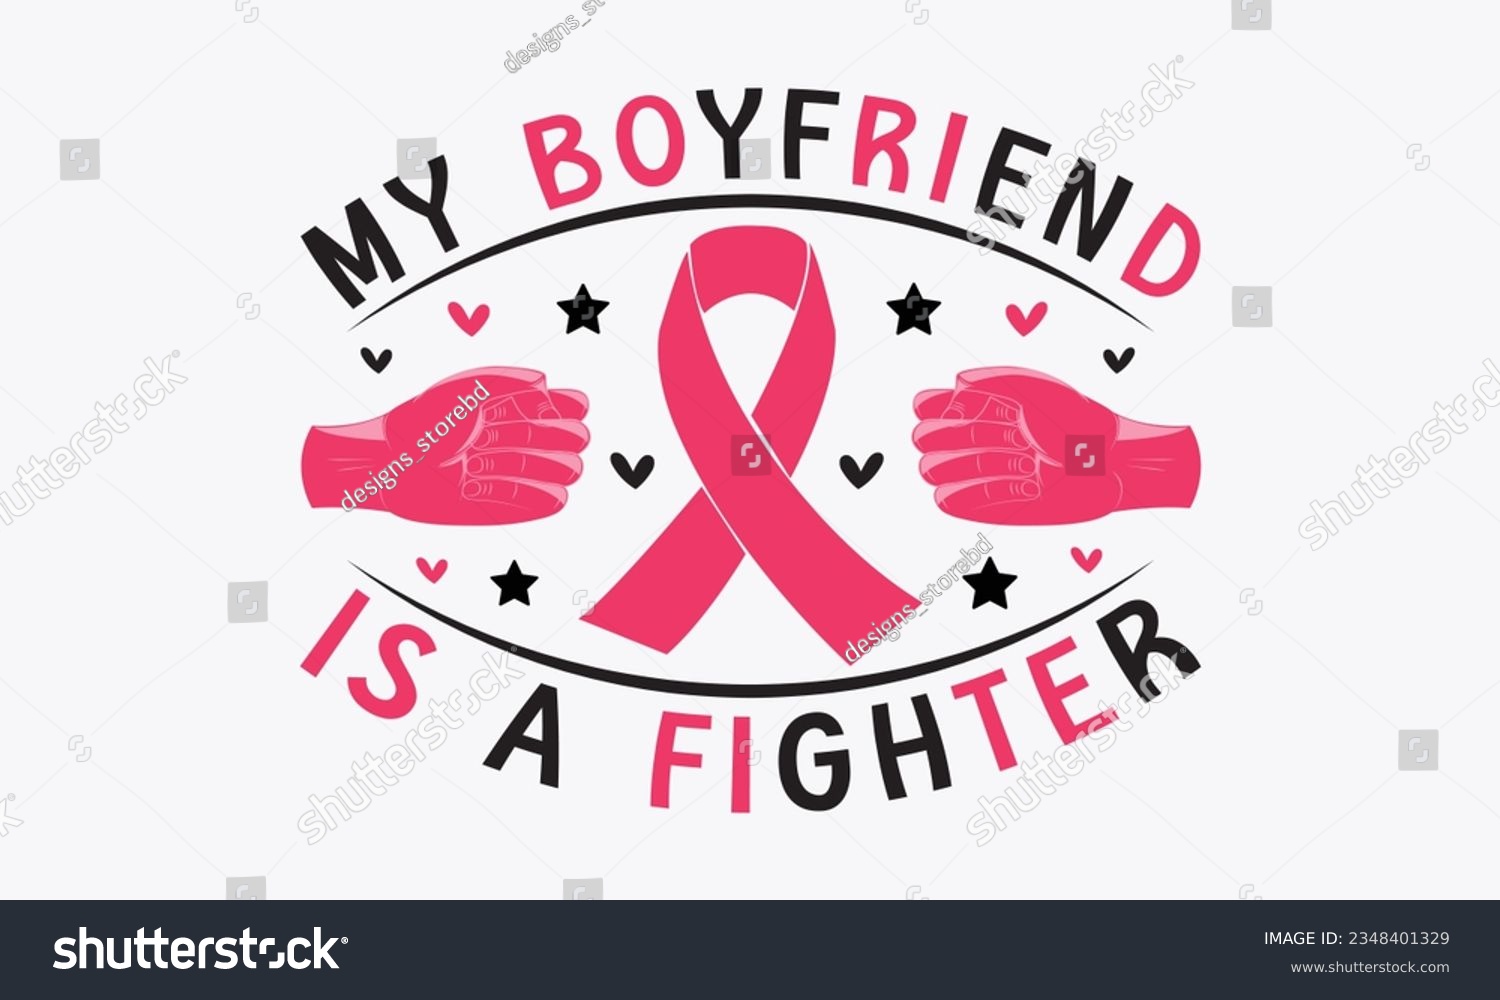 SVG of My boyfriend is a fighter svg, Breast Cancer SVG design, Cancer Awareness, Instant Download, Breast Cancer Ribbon svg, cut files, Cricut, Silhouette, Breast Cancer t shirt design Quote bundle svg